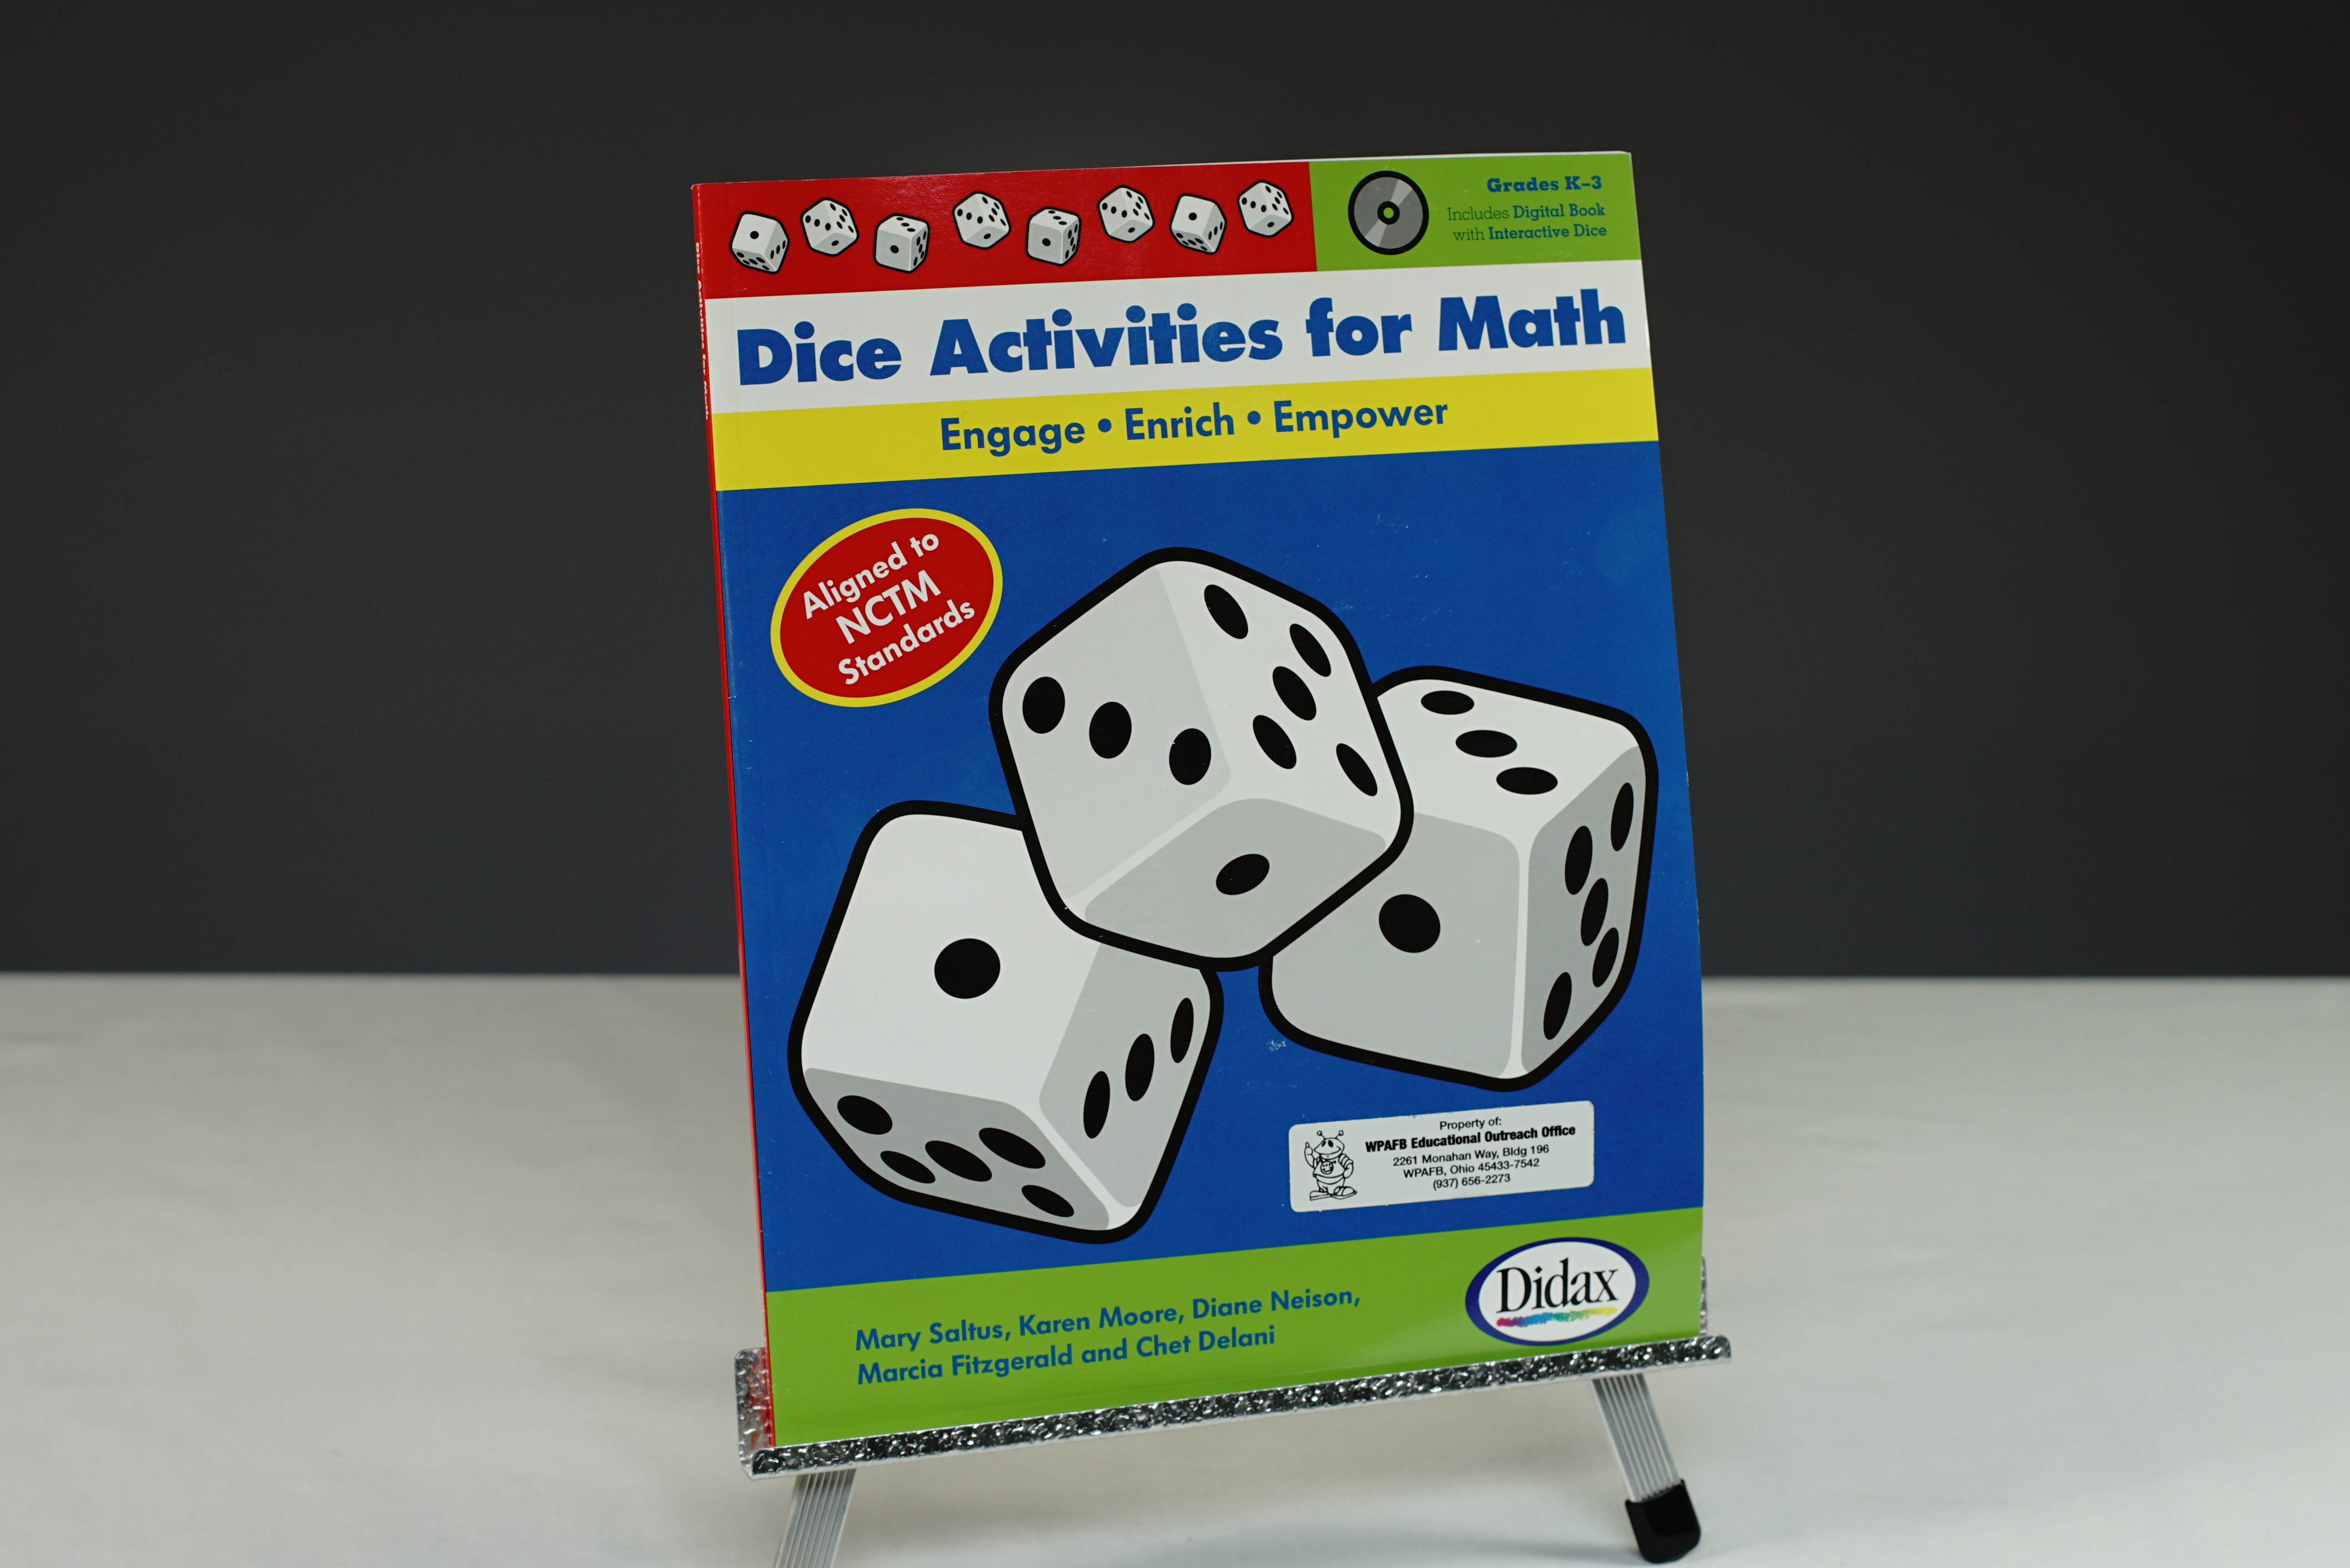 Dice Activities for Math Book